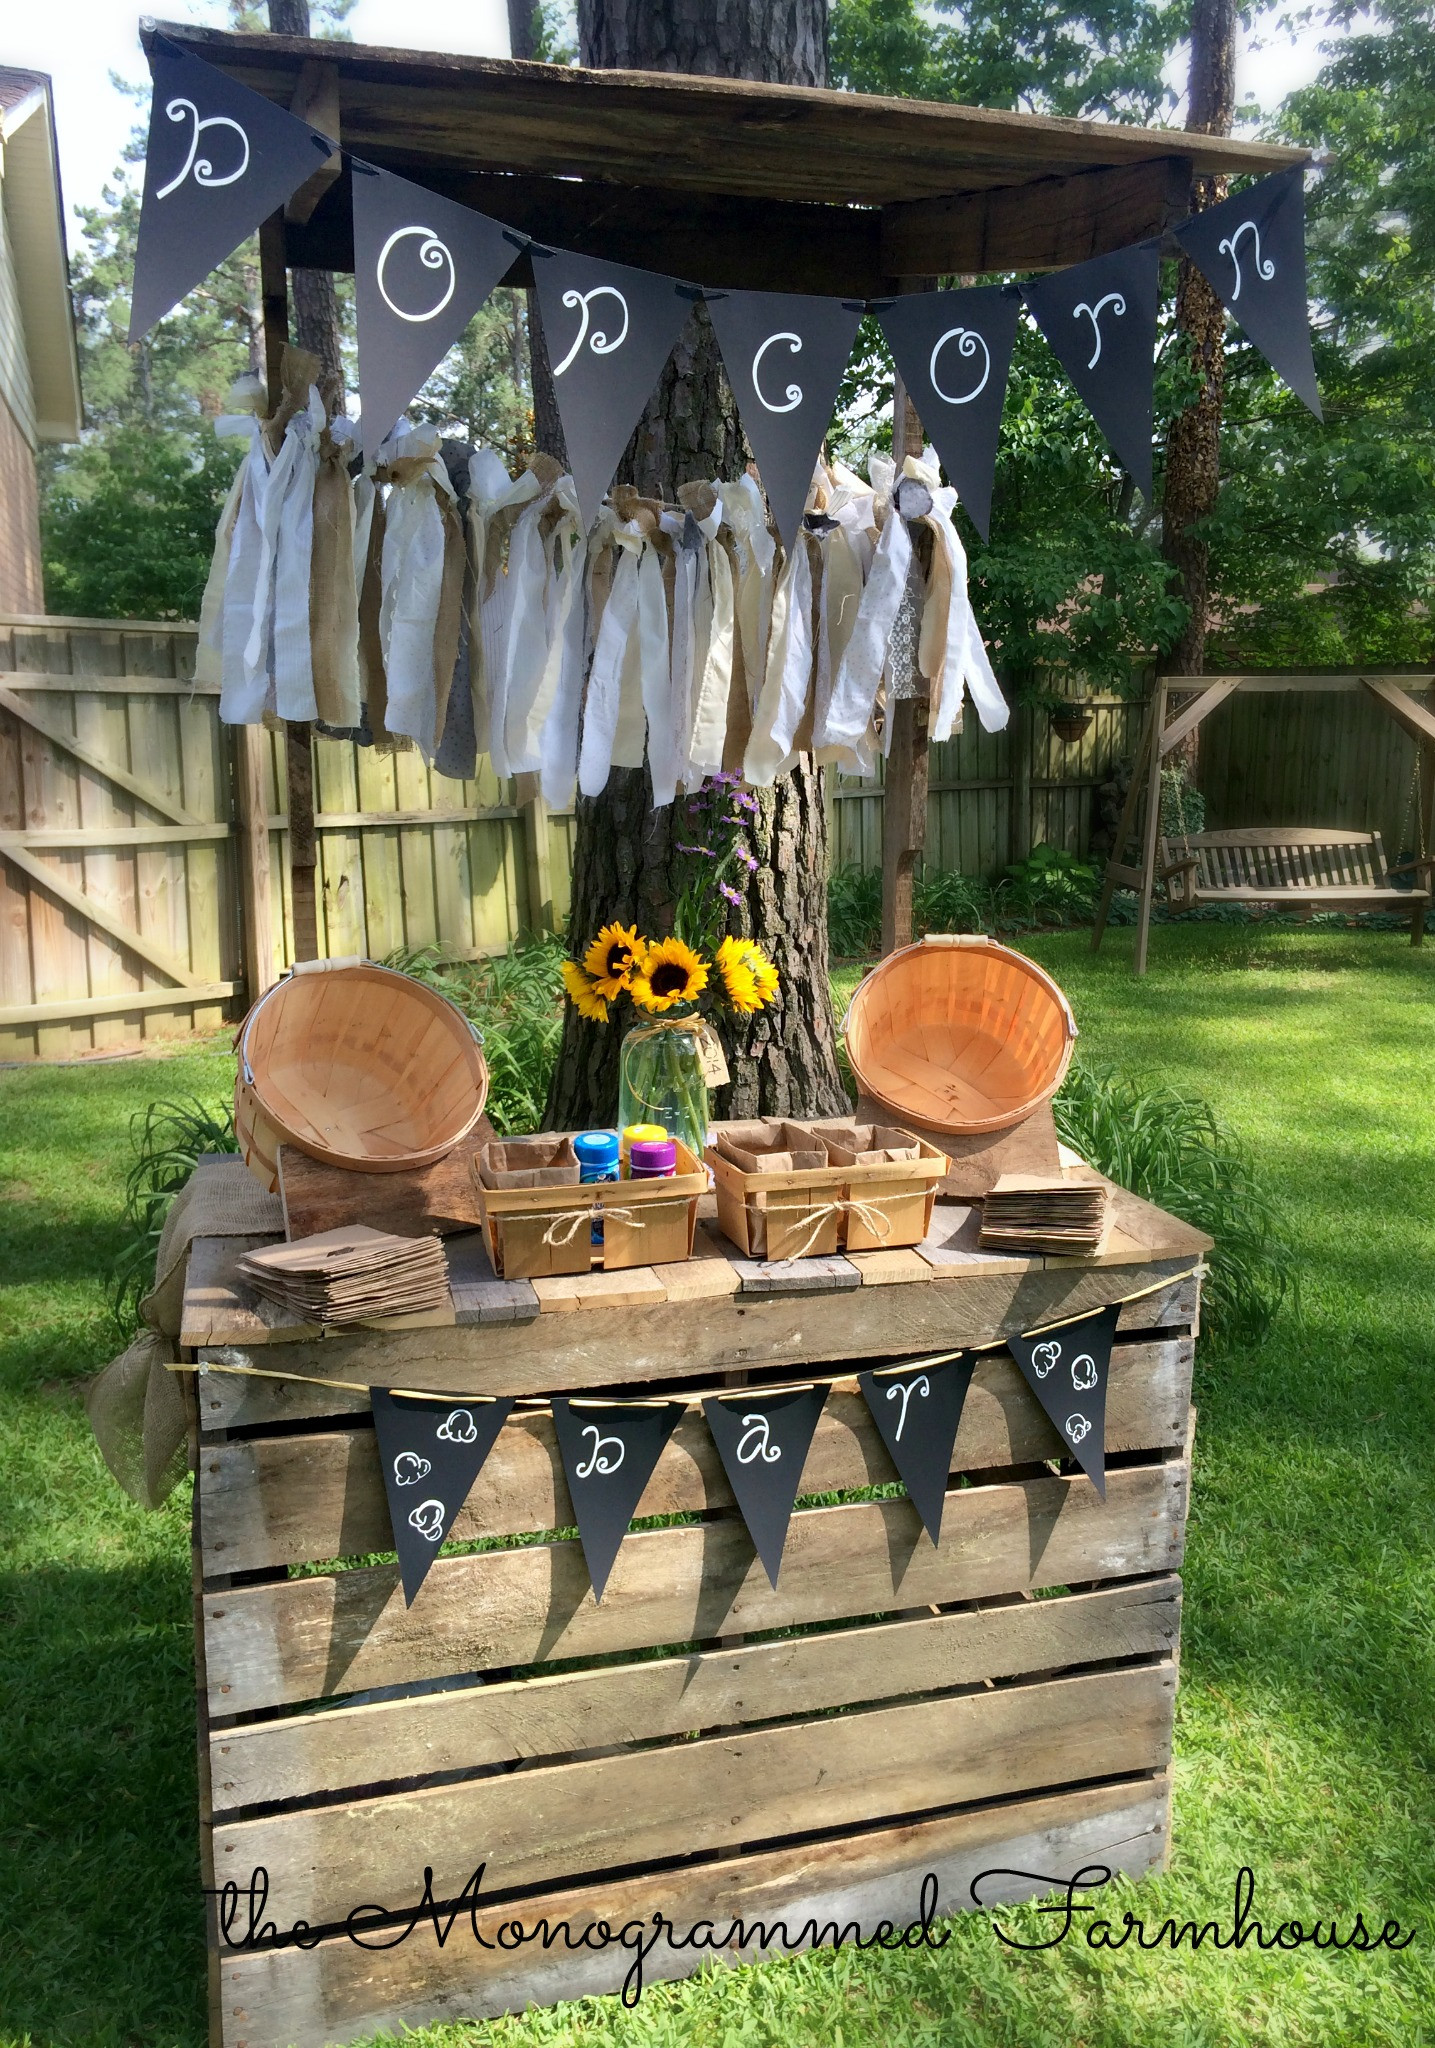 Chic Simple Backyard Graduation Party Decorating Ideas
 Rustic Country Themed Graduation Party